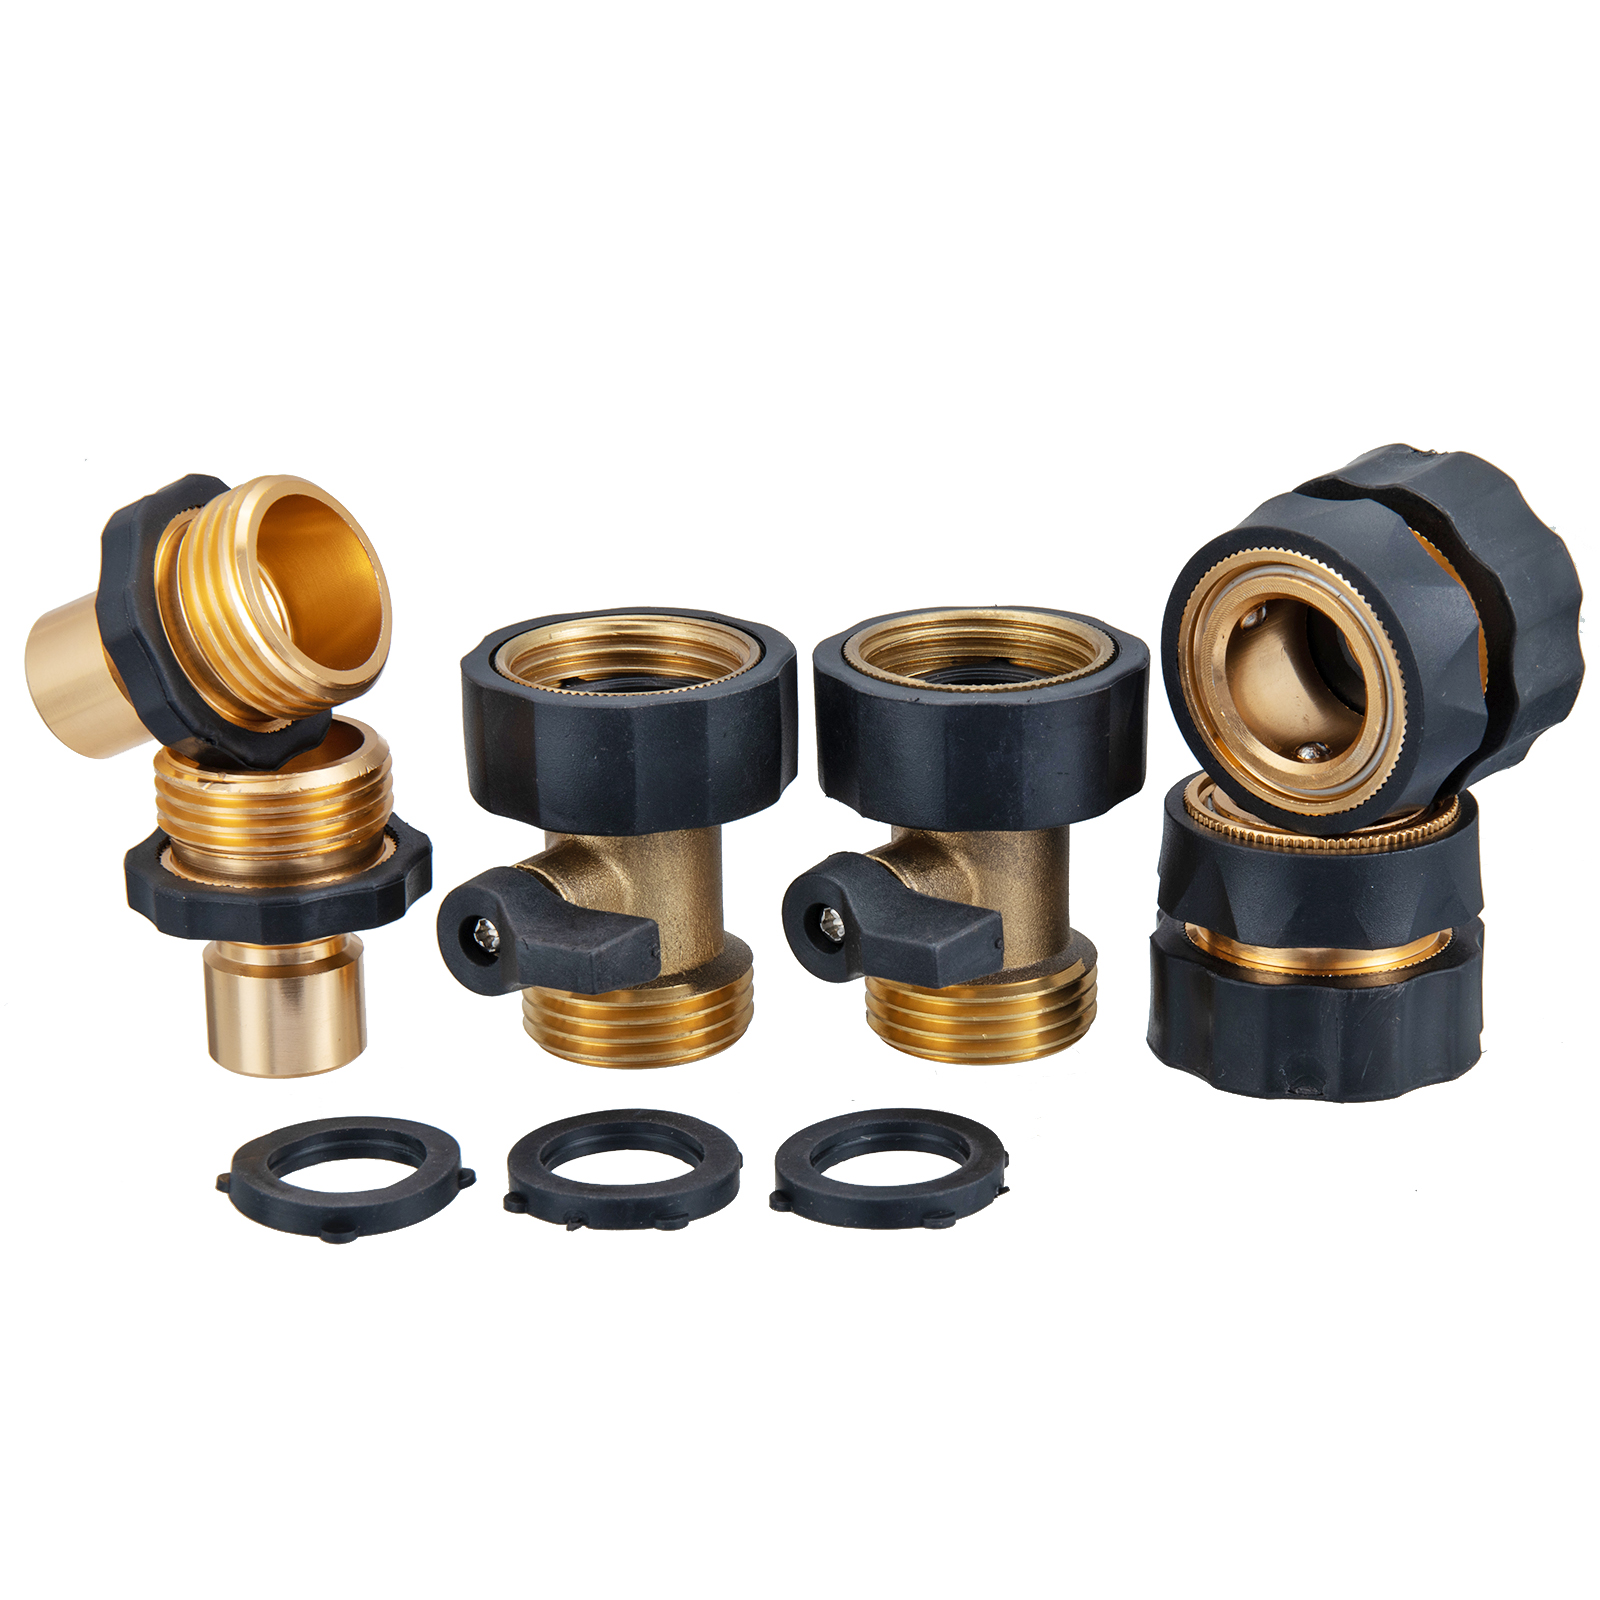 34-Garden-Hose-Quick-Connect-Water-Hose-Fit-Brass-Female-Male-Connector-Set-1943824-2